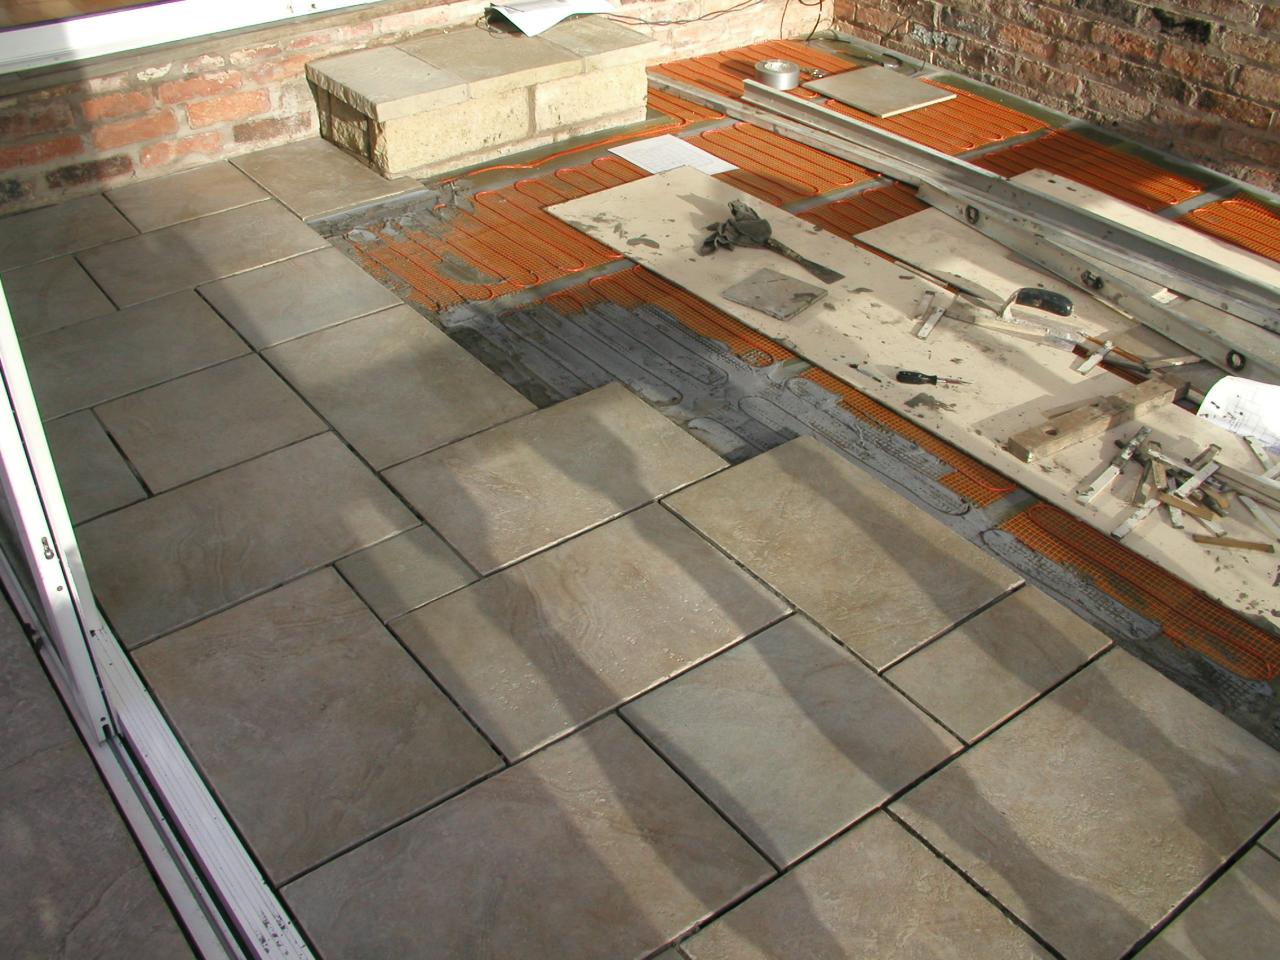 JPEG image - 20th Jan: Almost a third of the tiling done: looks as if they will go quite well with the old concrete - once they have been grouted in grey.  ...